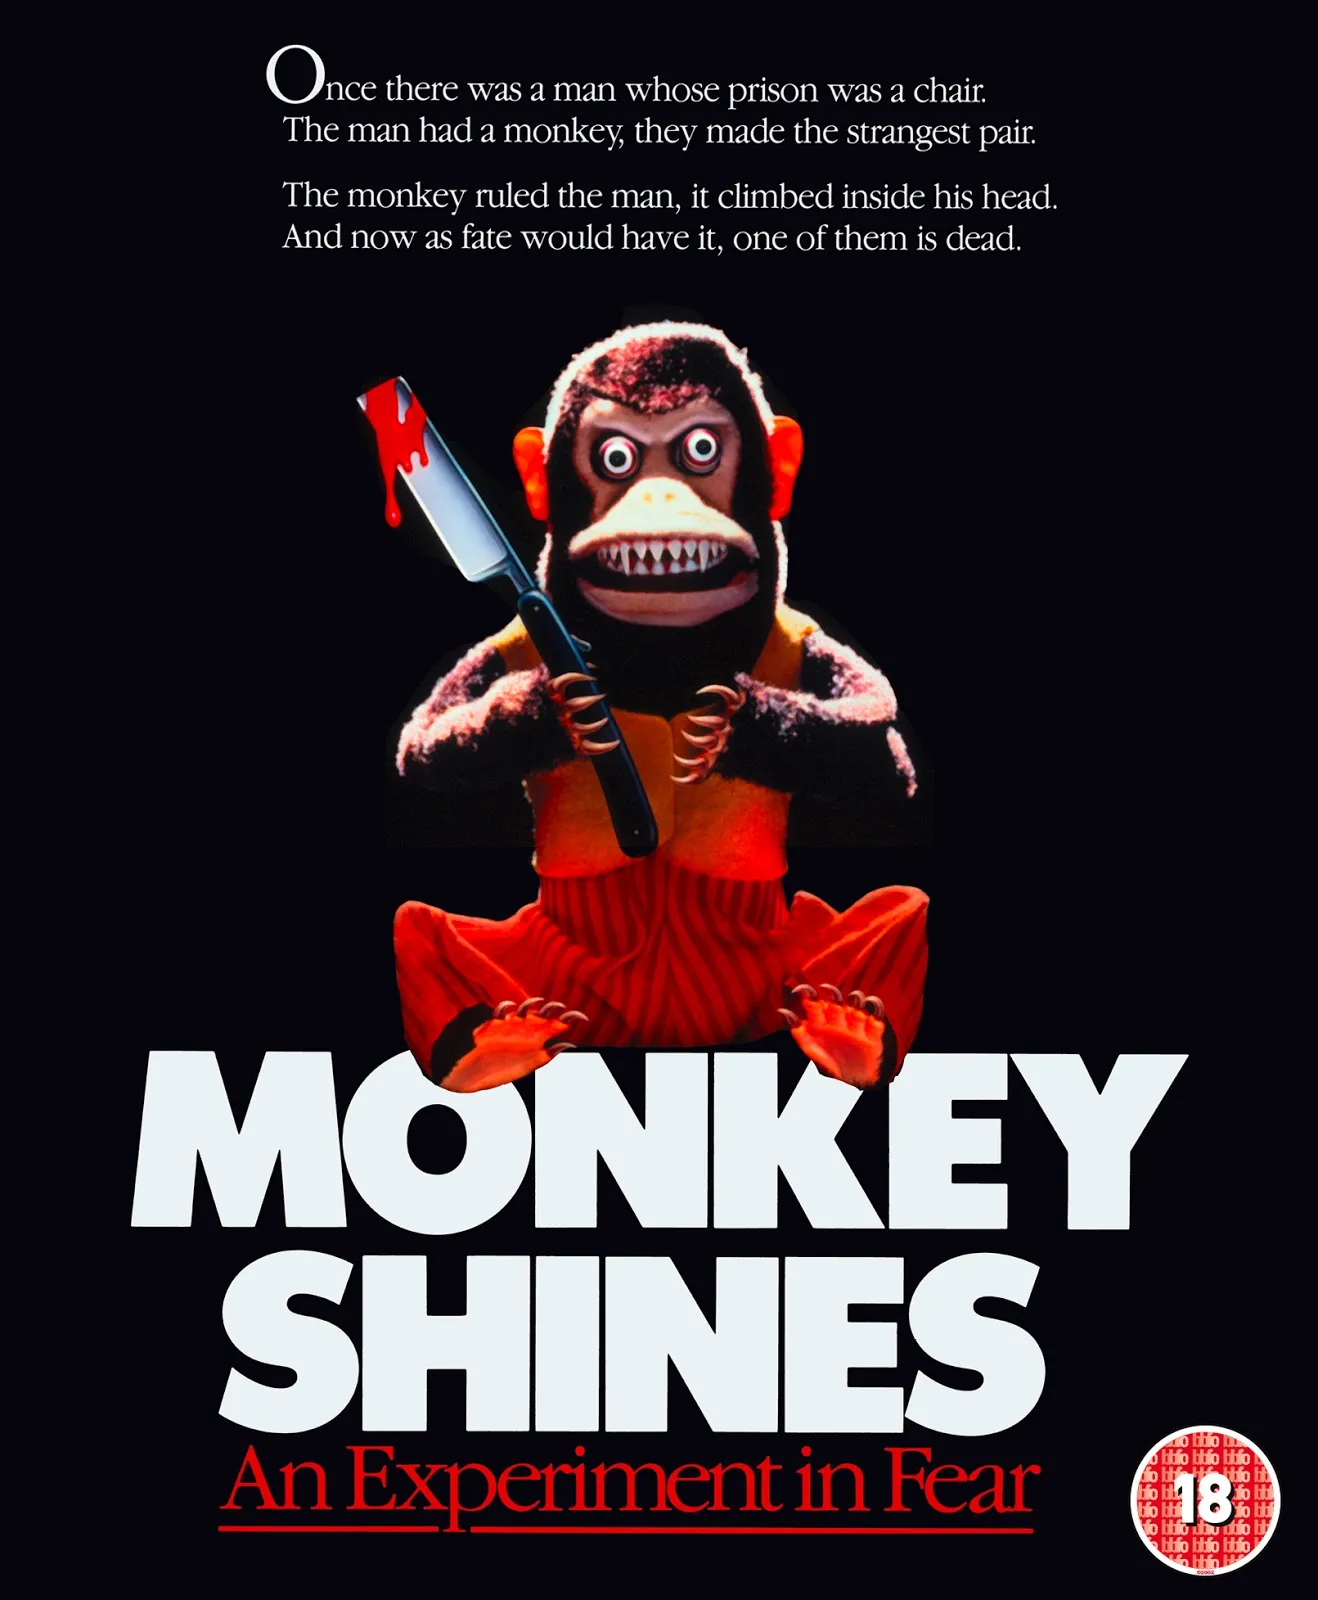 Cover of Monkey Shines dvd, featuring an angry toy monkey with bloody knife in its hands.